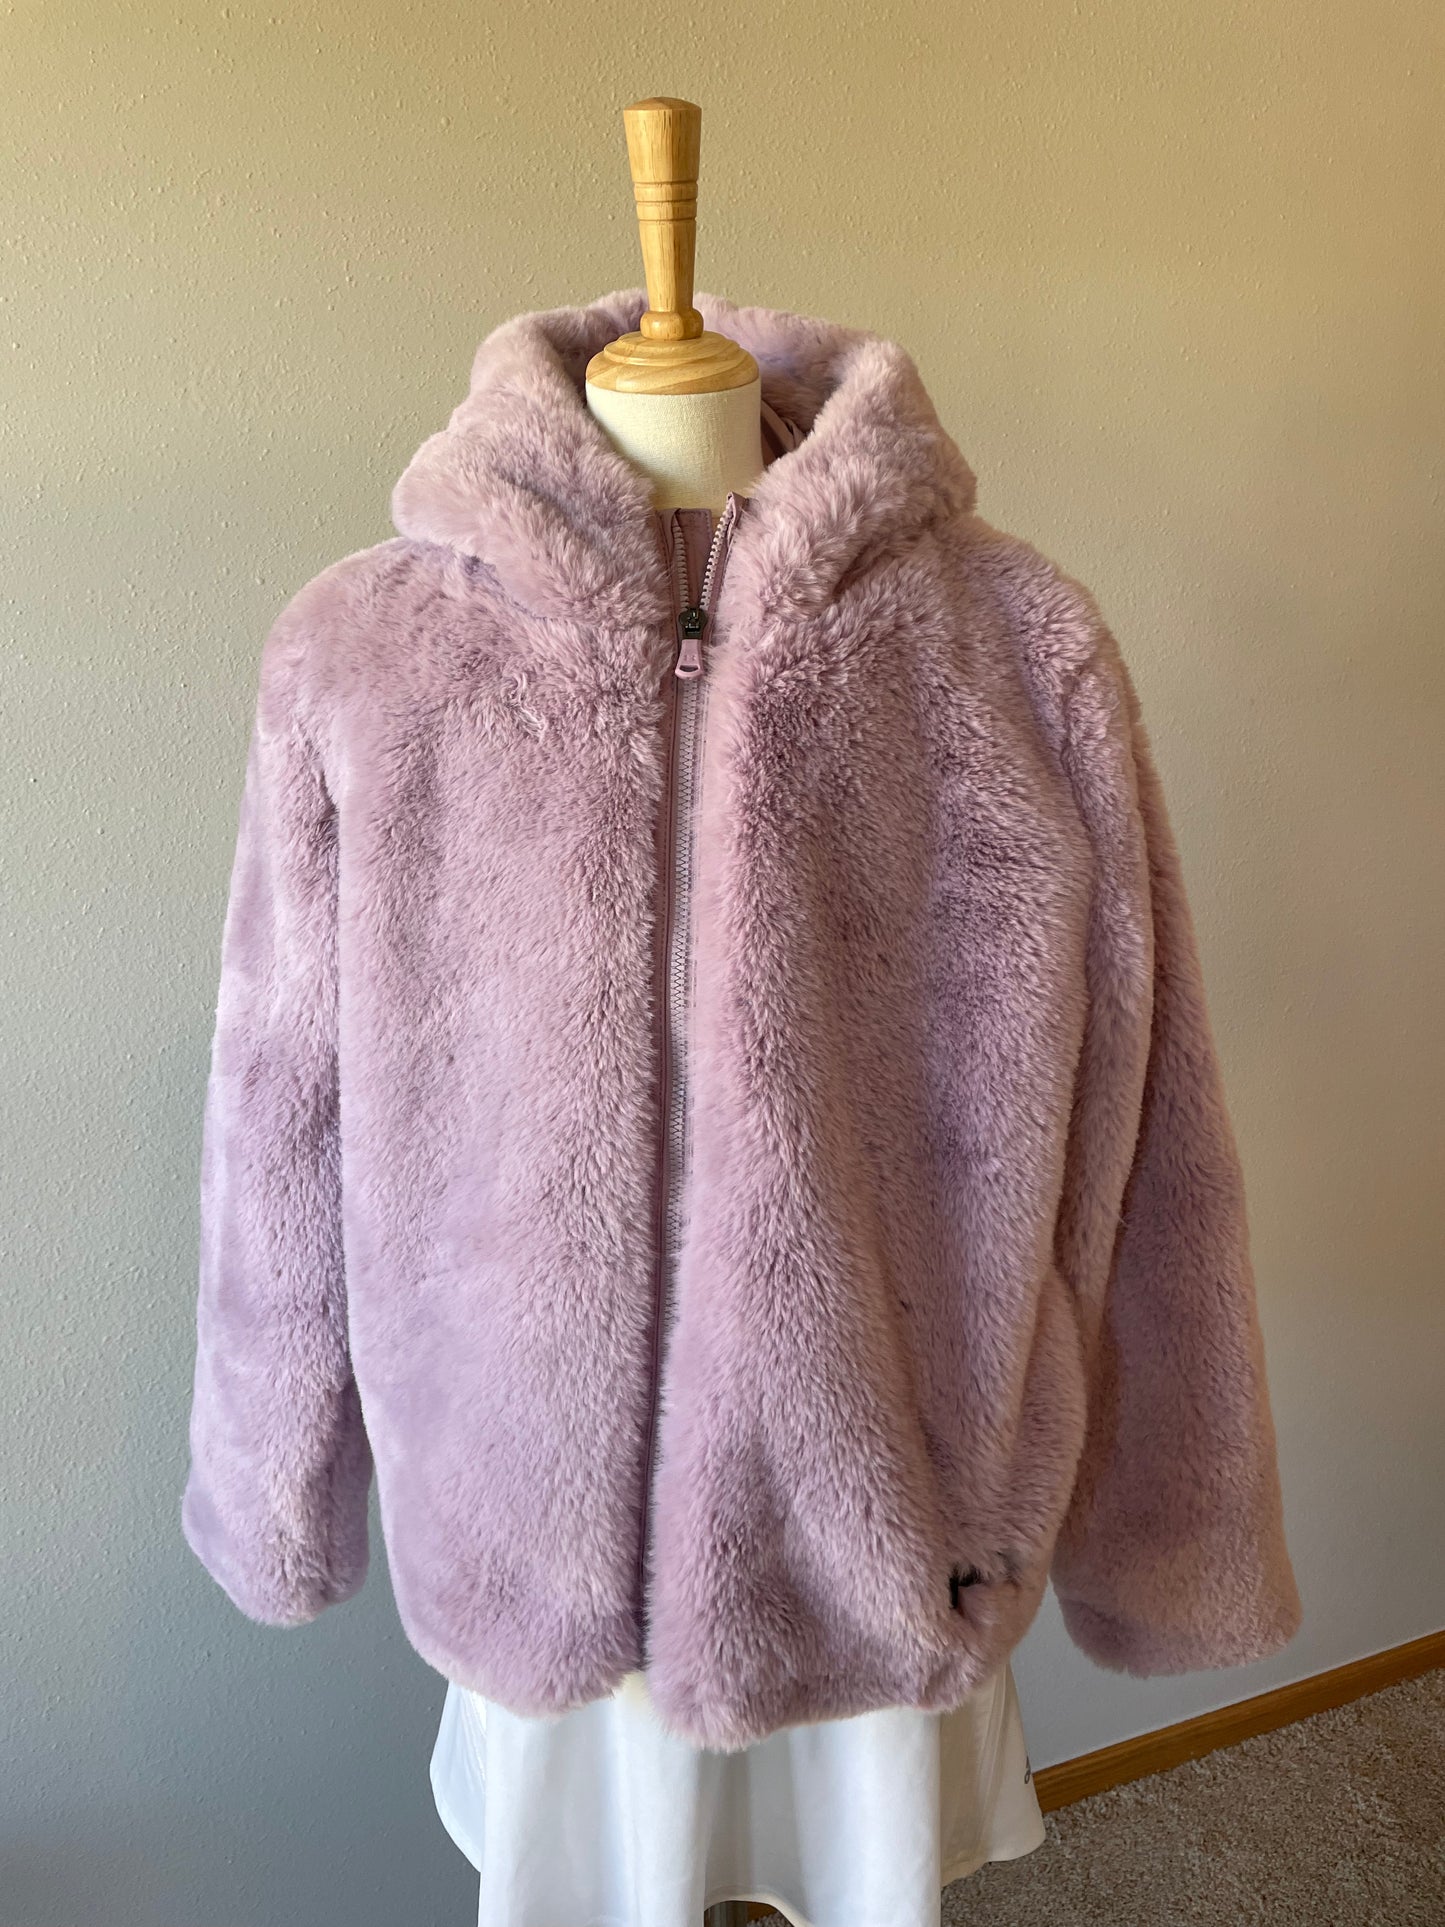 Under Armour Faux Fur Hooded Coat (YLG)